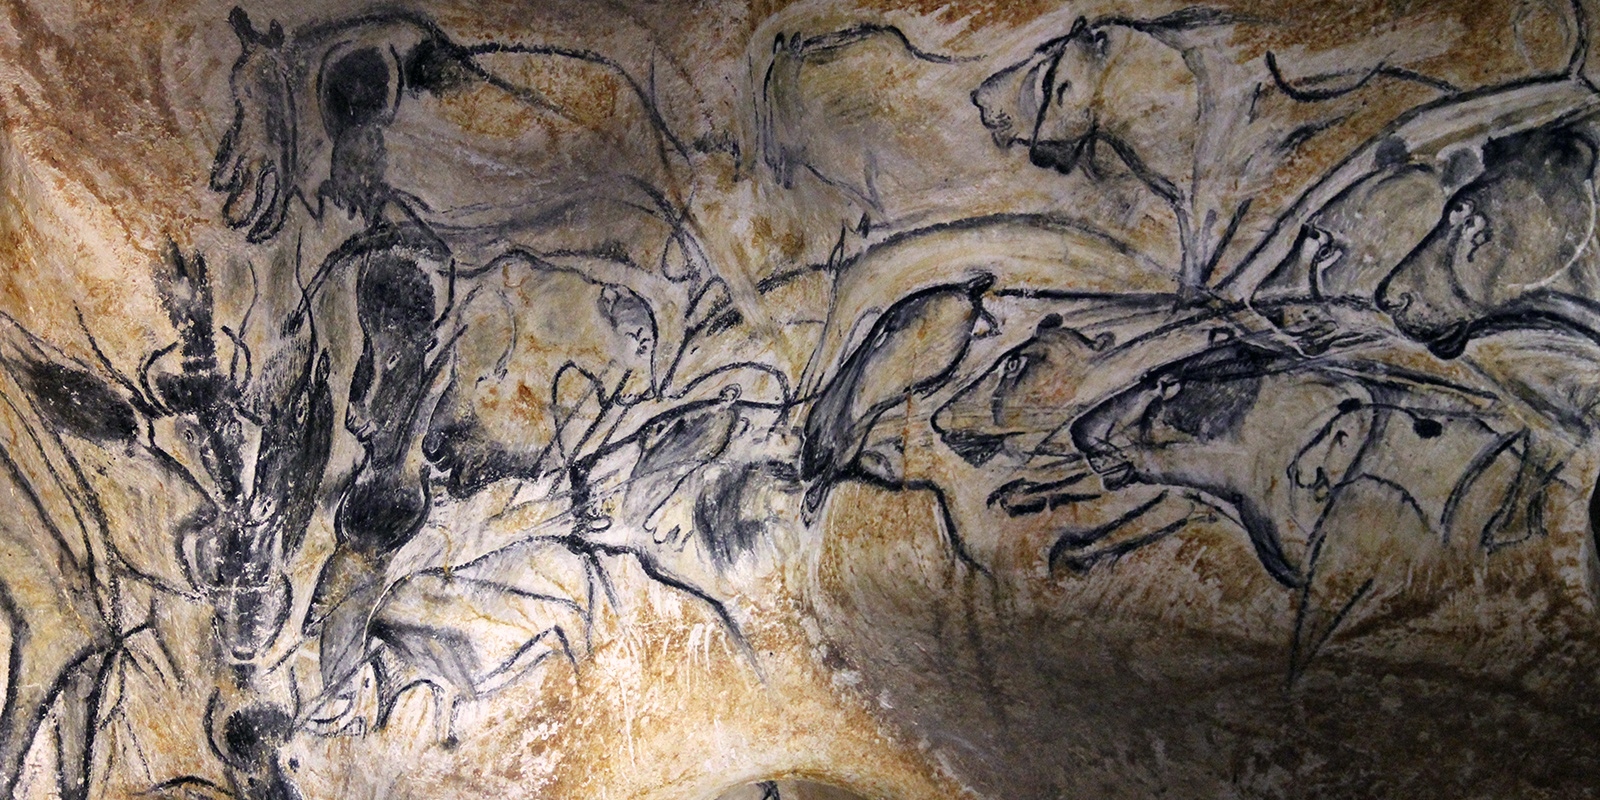 Cave art found at the Chauvet Cave in France. These drawings are more than 30,000 years old.